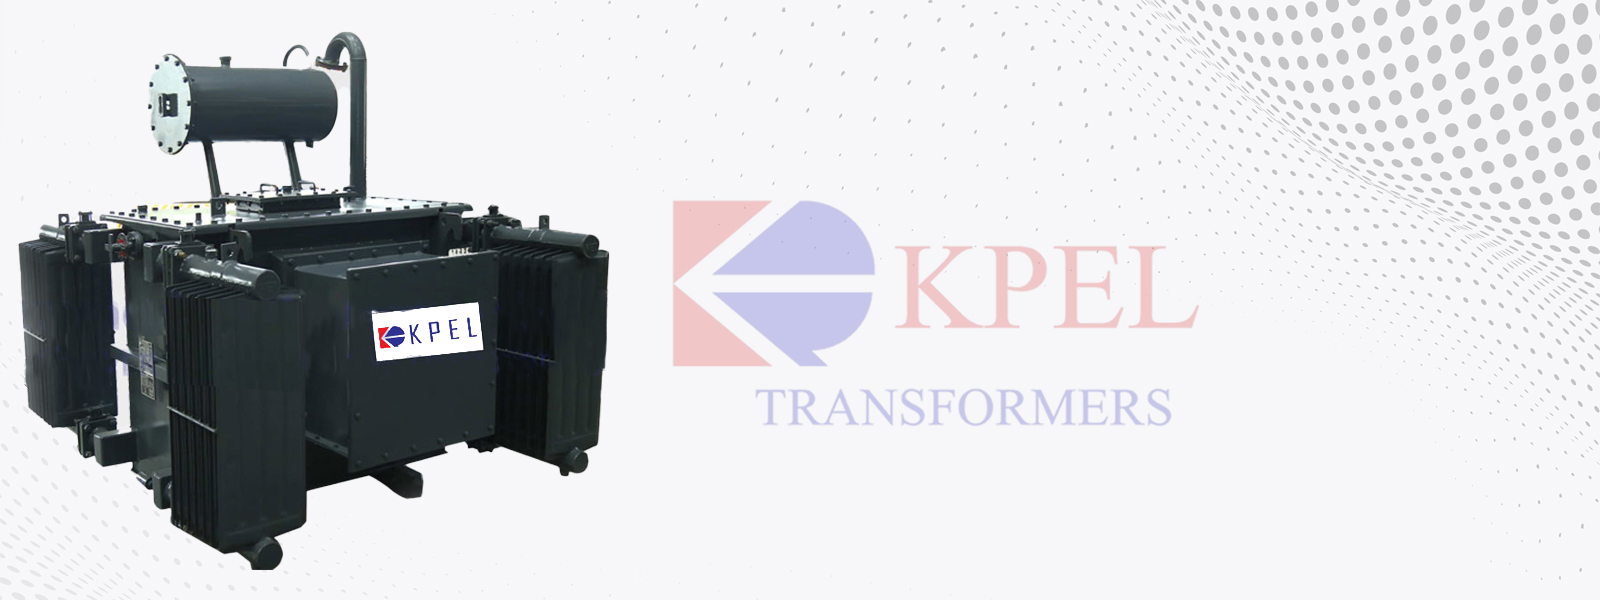 Top Power transformers manufacturing company